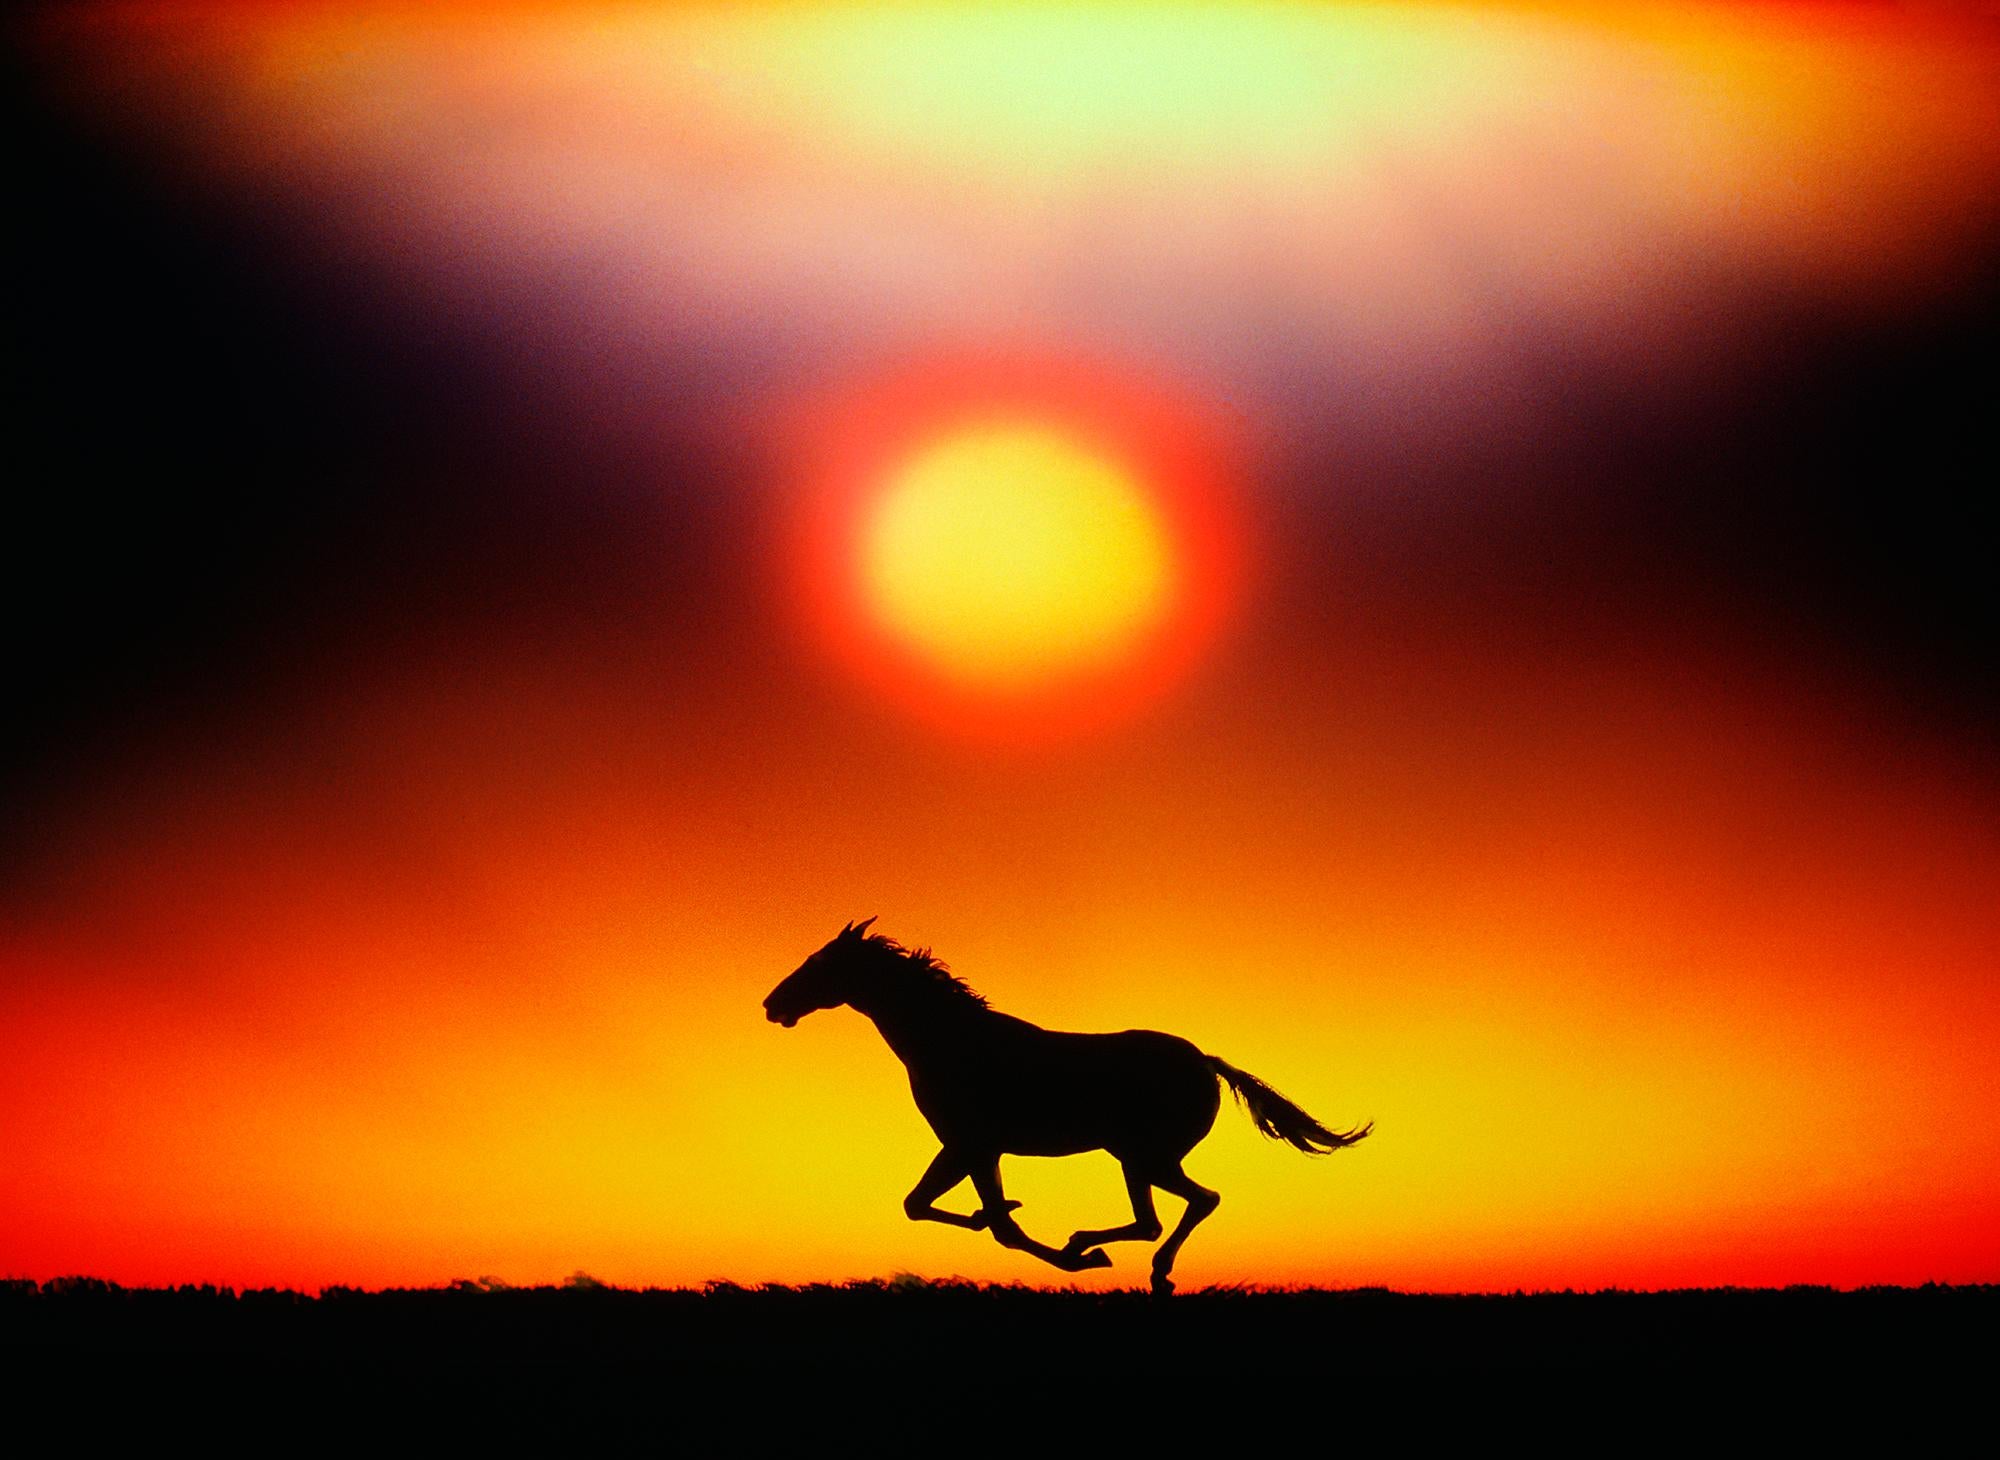 Mitchell Funk Landscape Photograph - Running Horse at Sunset - Dave Grusin Album Cover